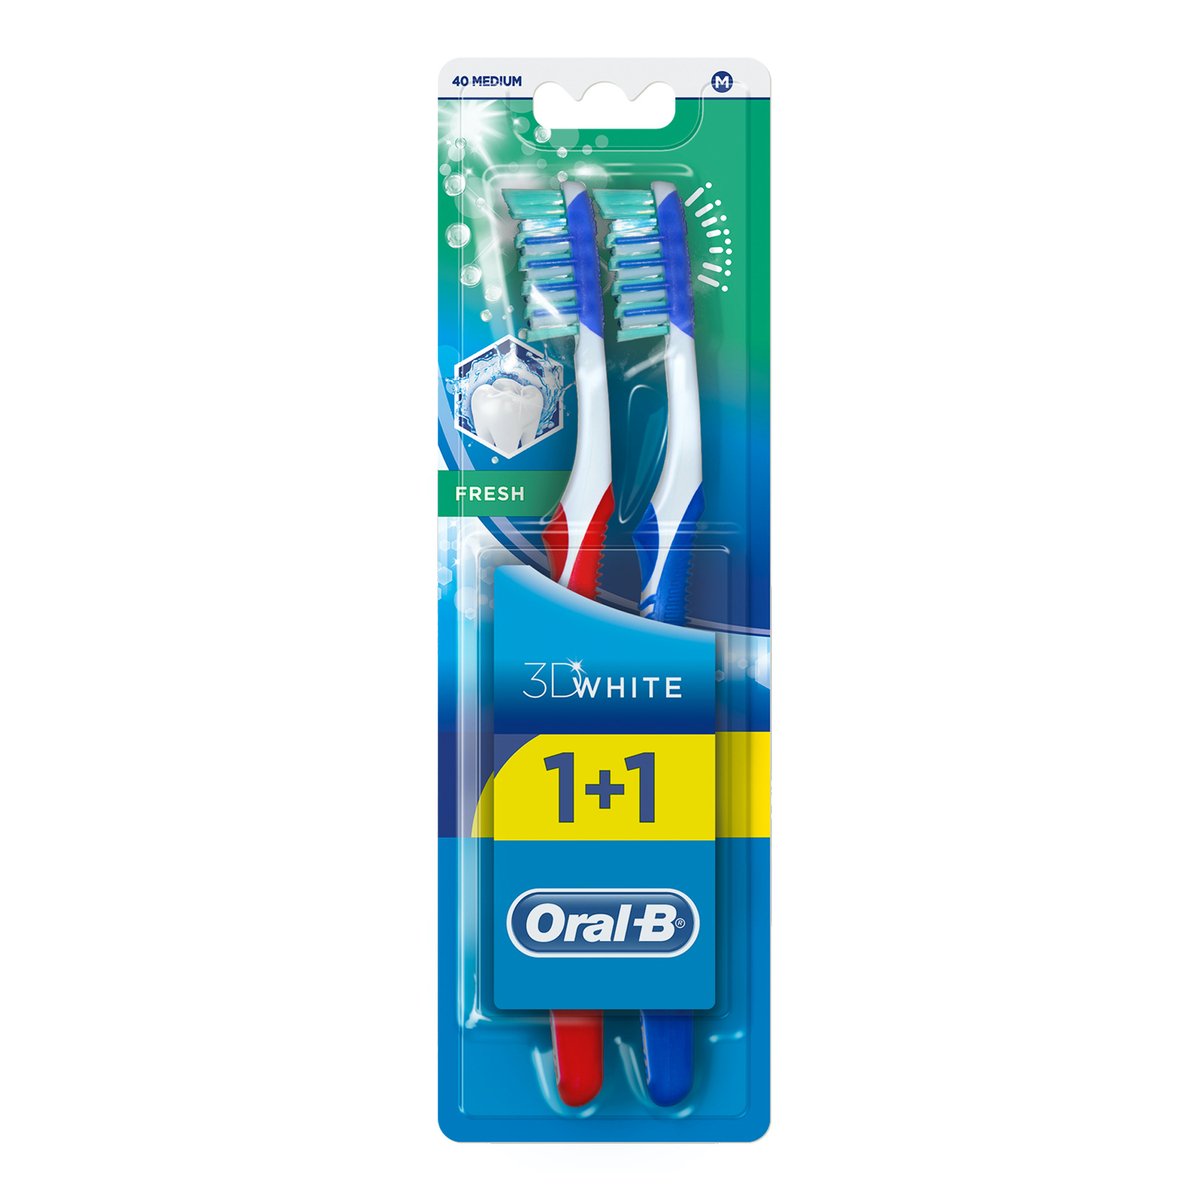 Oral B Toothbrush 3D White Fresh Medium Assorted Colors 1+1